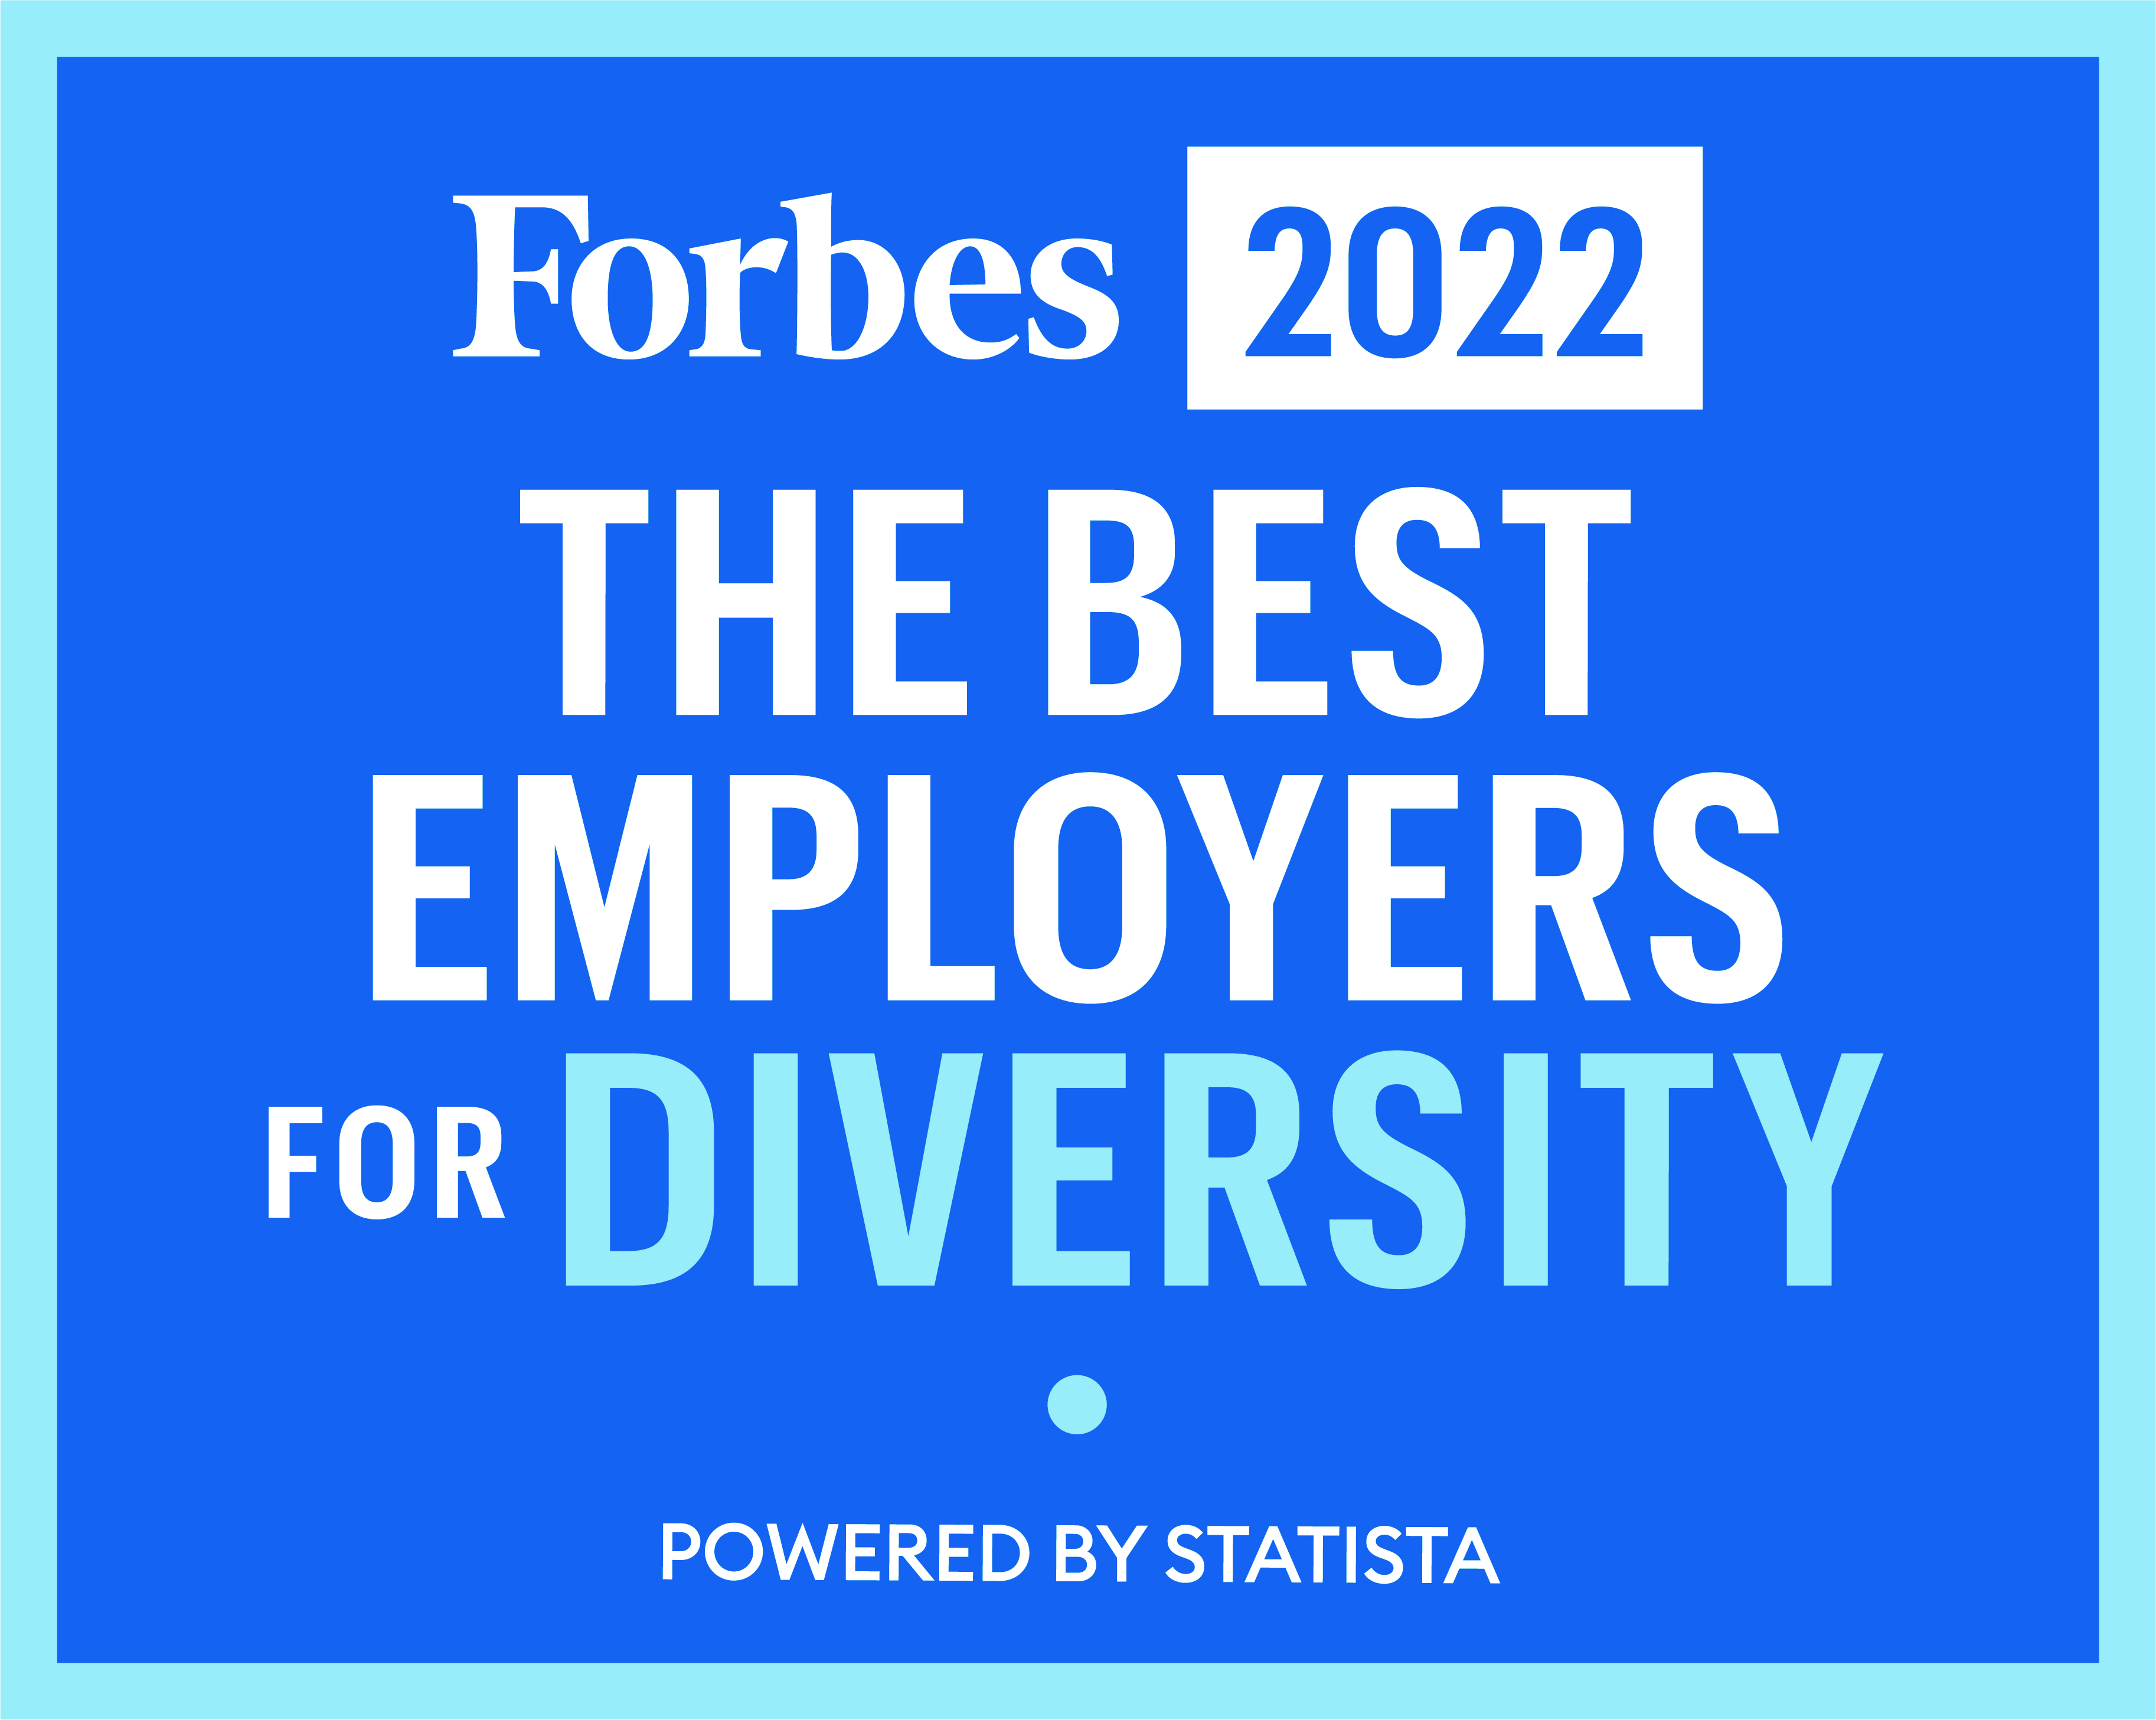 Forbes Best Employers for Diversity 2022, Diversity Equity and Inclusion in the Workplace